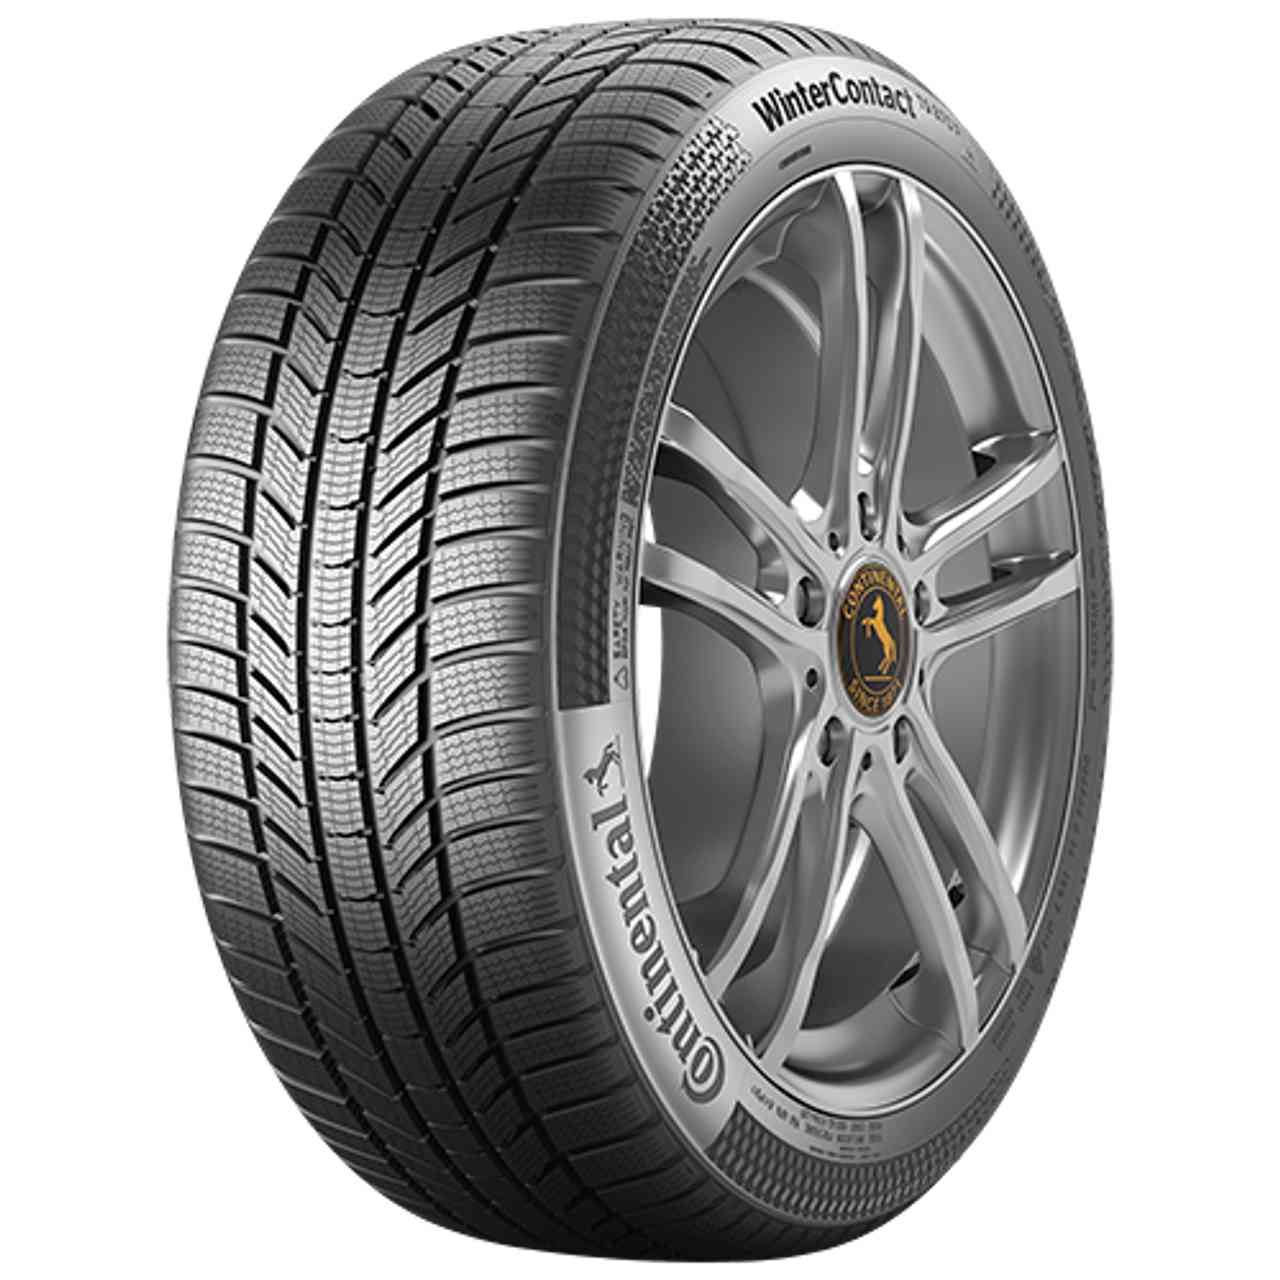 CONTINENTAL WINTERCONTACT TS 870 P (EVc) 205/45R17 88V FR BSW von Continental